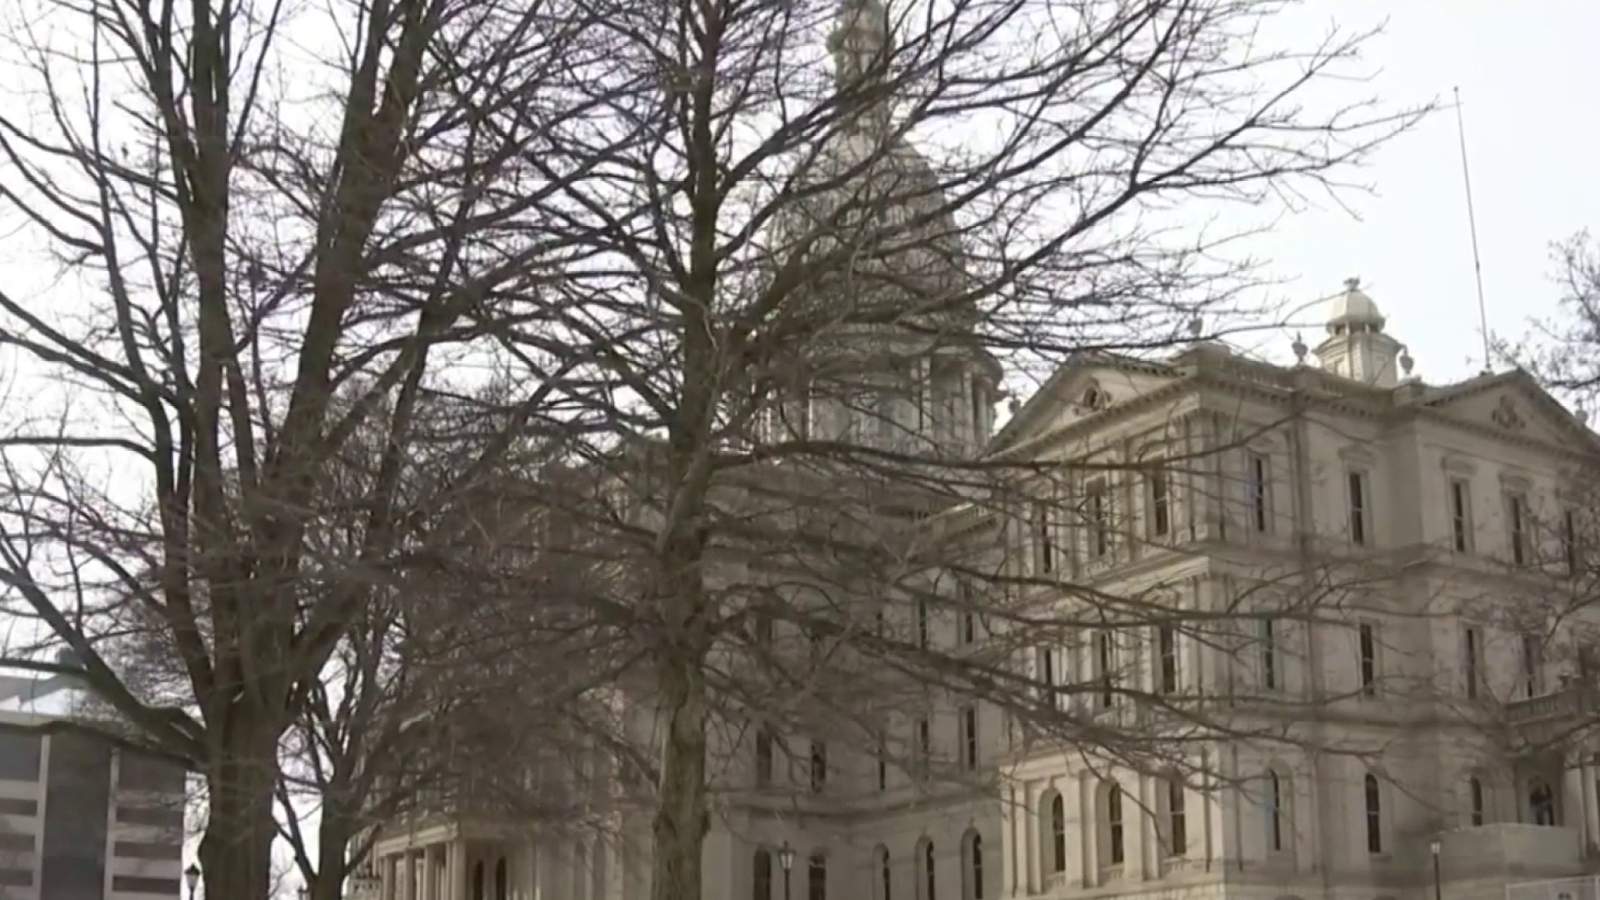 Threats of violent cause safety concerns at the Capitol Building in Lansing